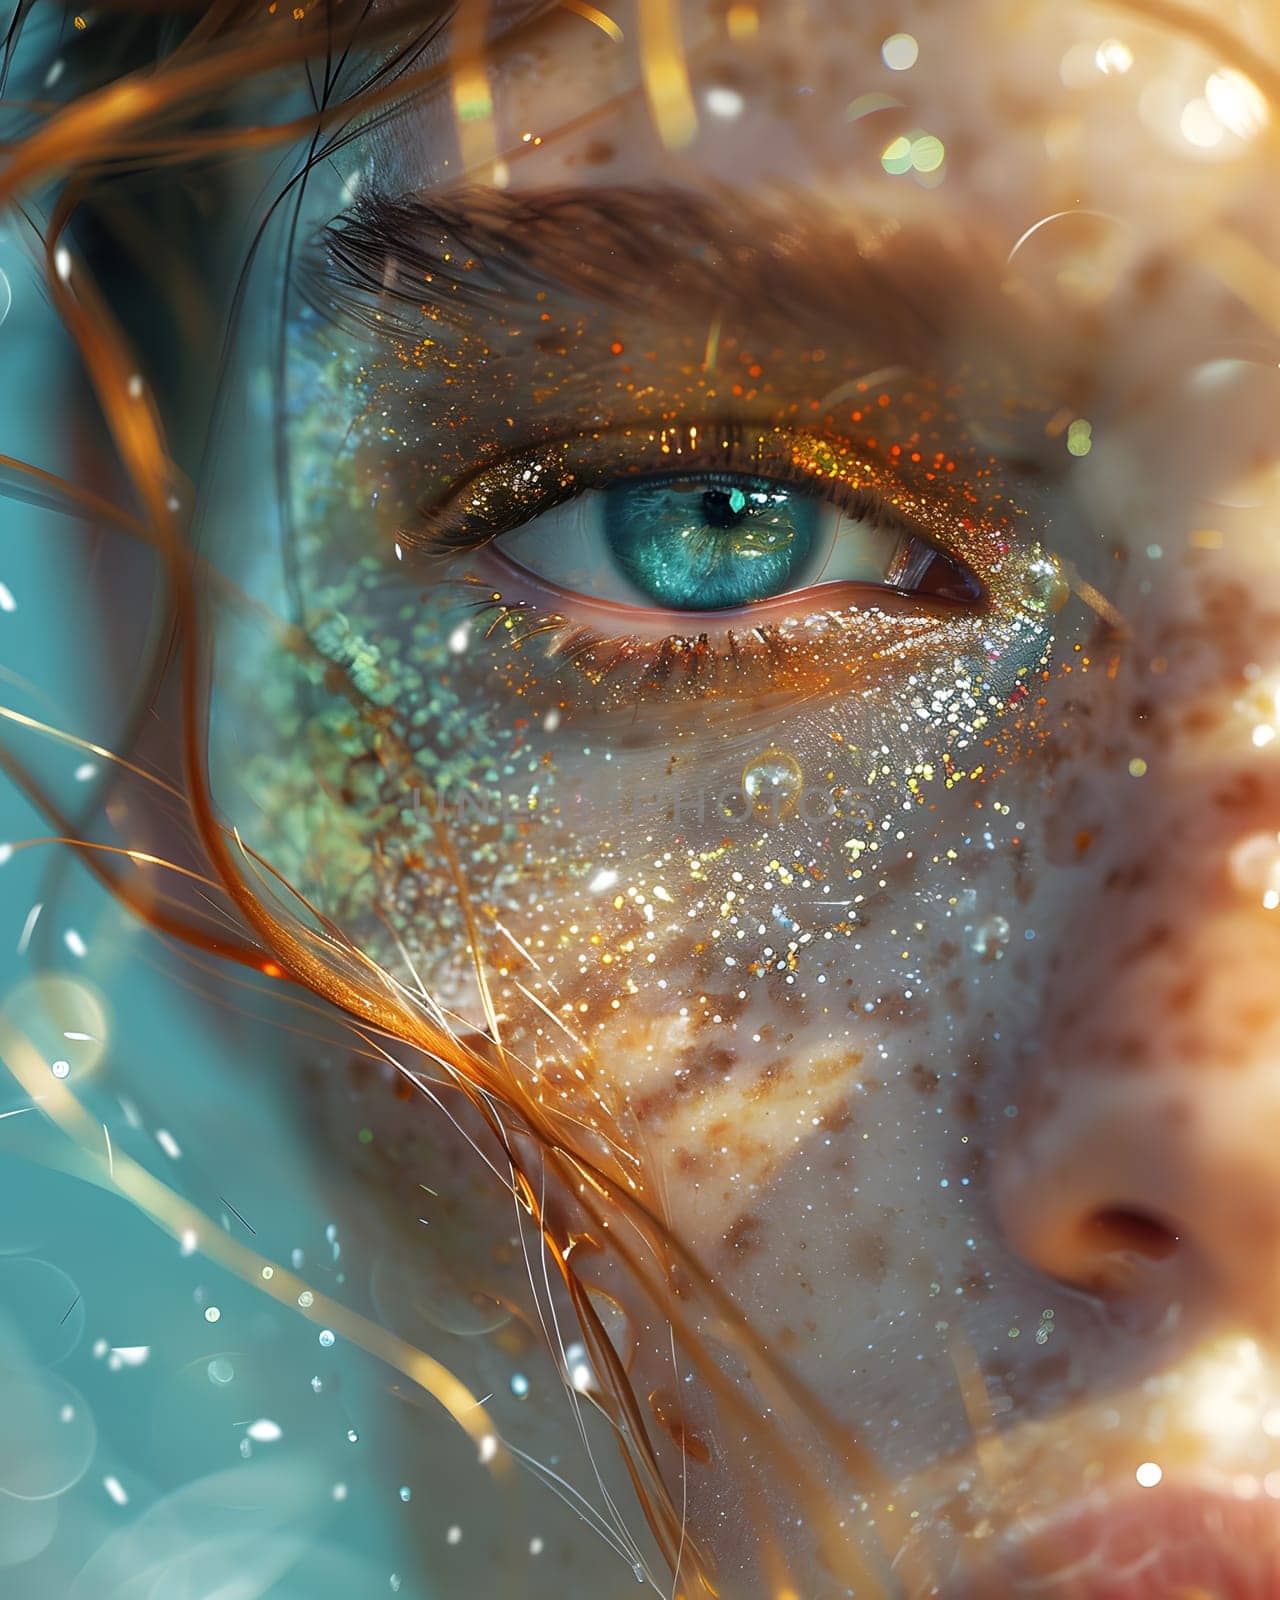 Closeup of a womans eye with glittery electric blue eyeshadow by Nadtochiy